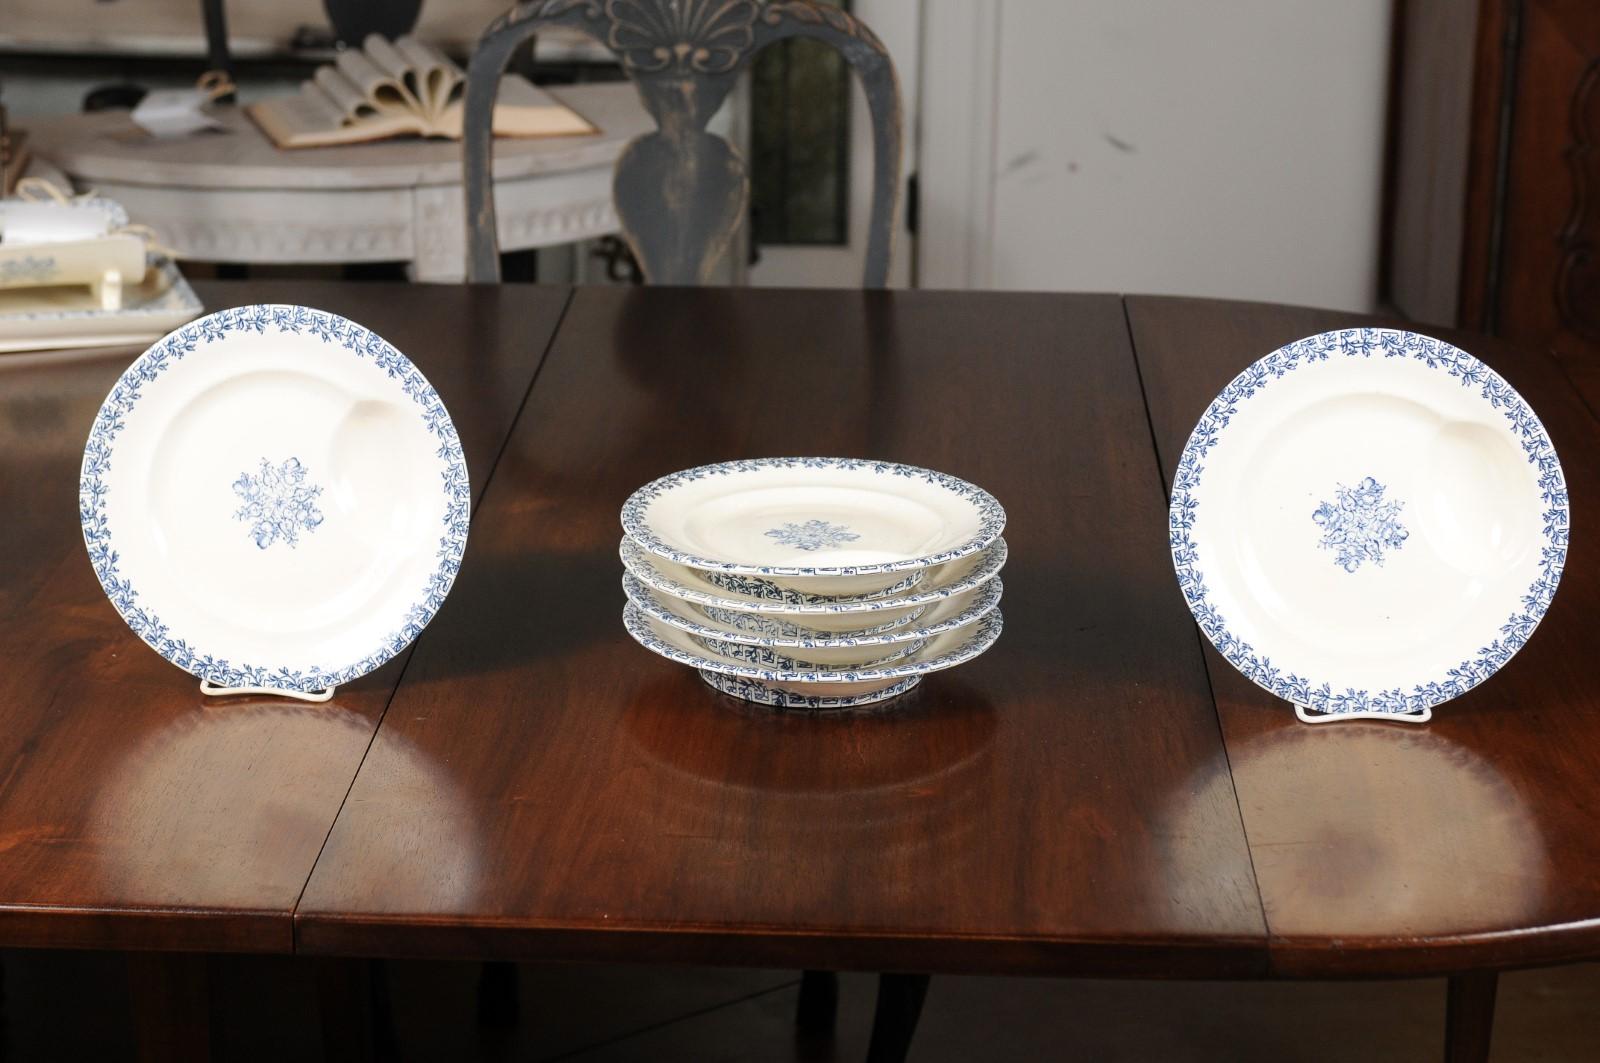 Six Terre de Fer blue and white asparagus plates from the 19th century, with foliage and fruit decor, priced and sold individually. Born in France during the 19th century, each of these plates features a blue foliage and fruit décor standing out